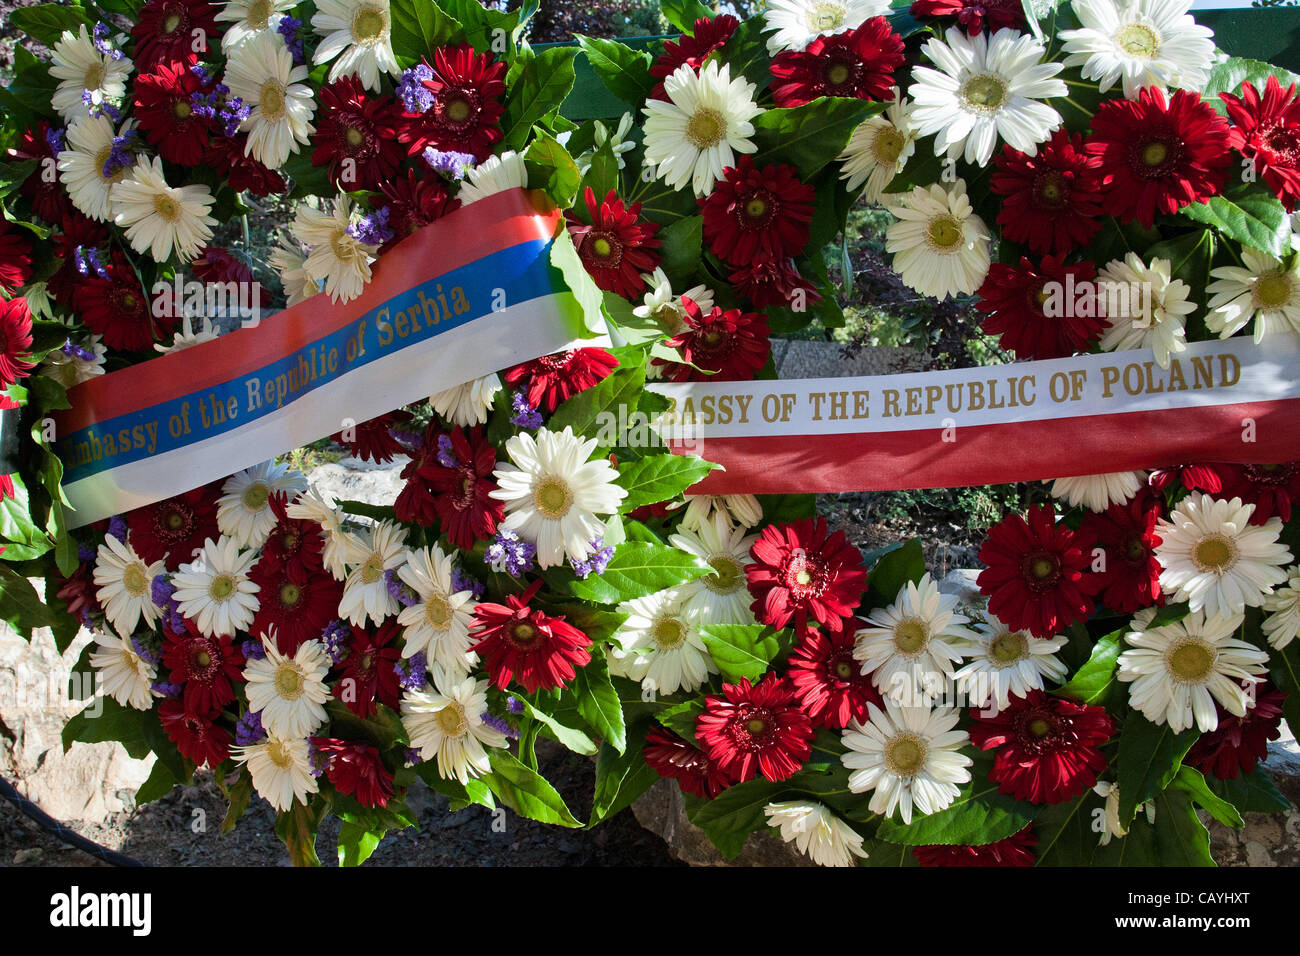 Wreaths of flowers representing countries taking part in ceremony commemorating Allied victory over Nazi Germany at Yad Vashem Holocaust Museum. Jerusalem, Israel. 9-May-2012. Stock Photo